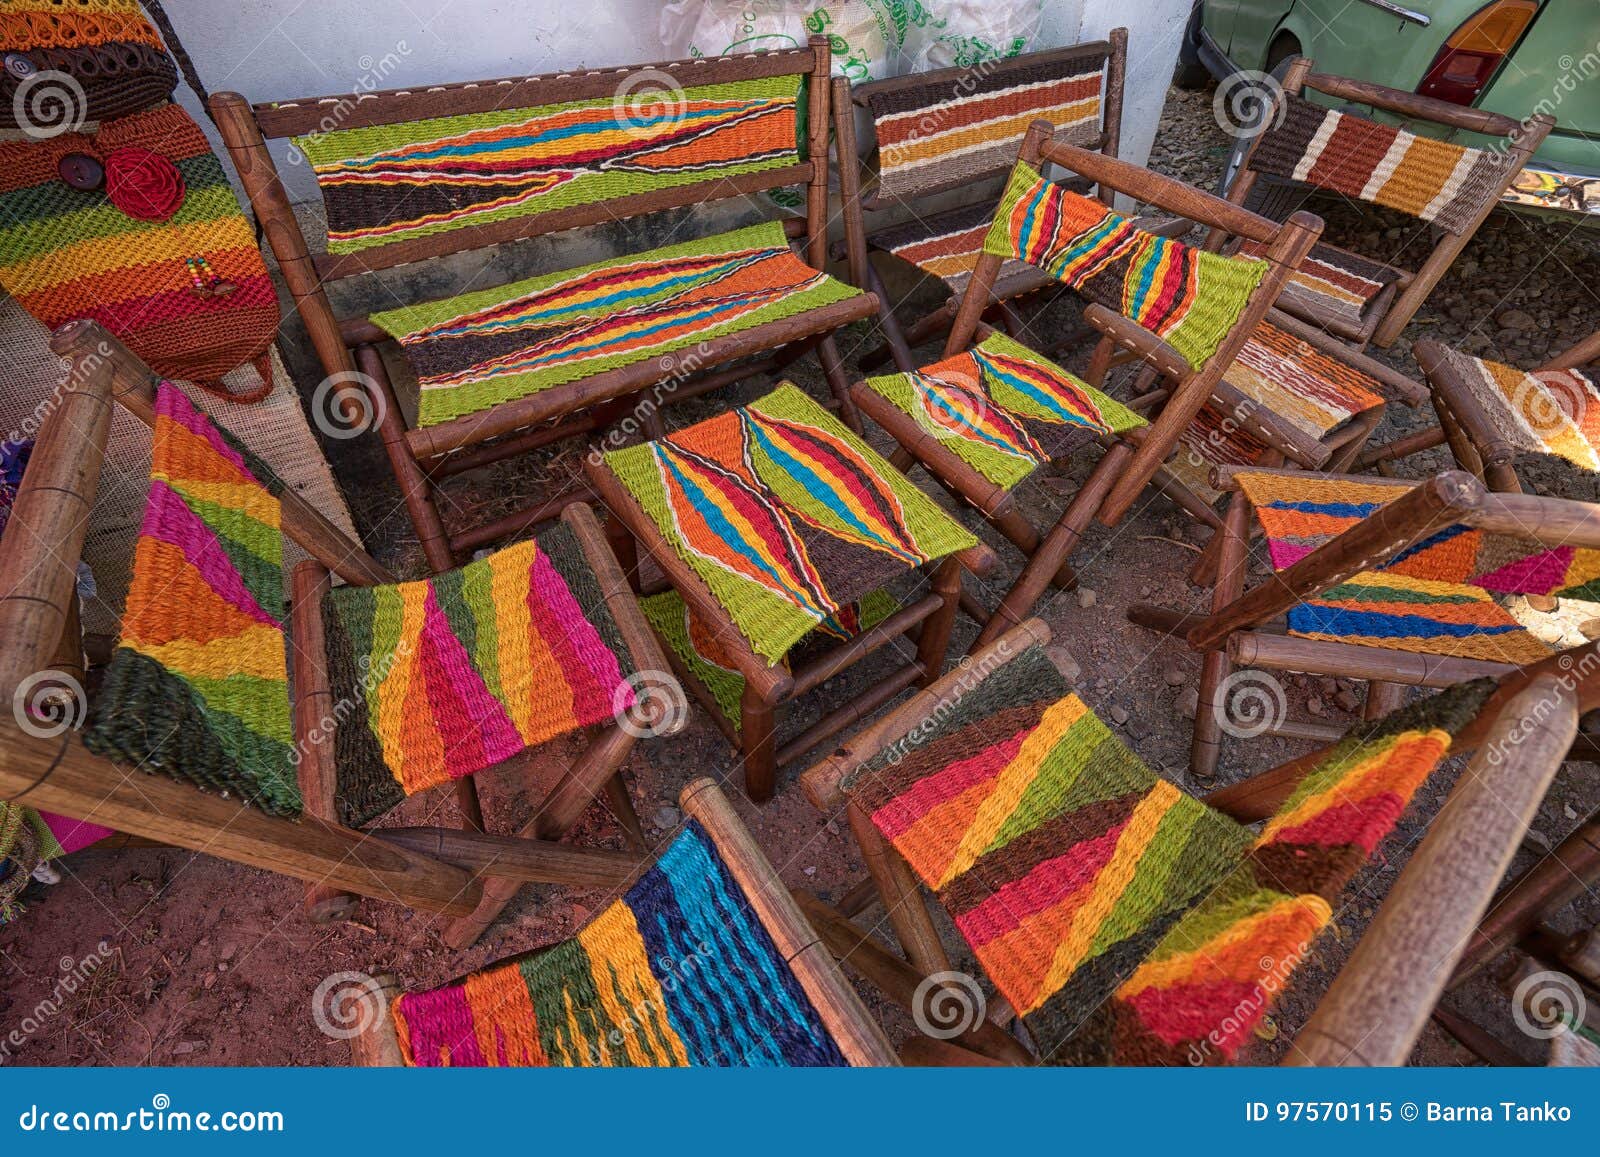 Colourful Knit Patio Furniture In Colombia Stock Image Image Of